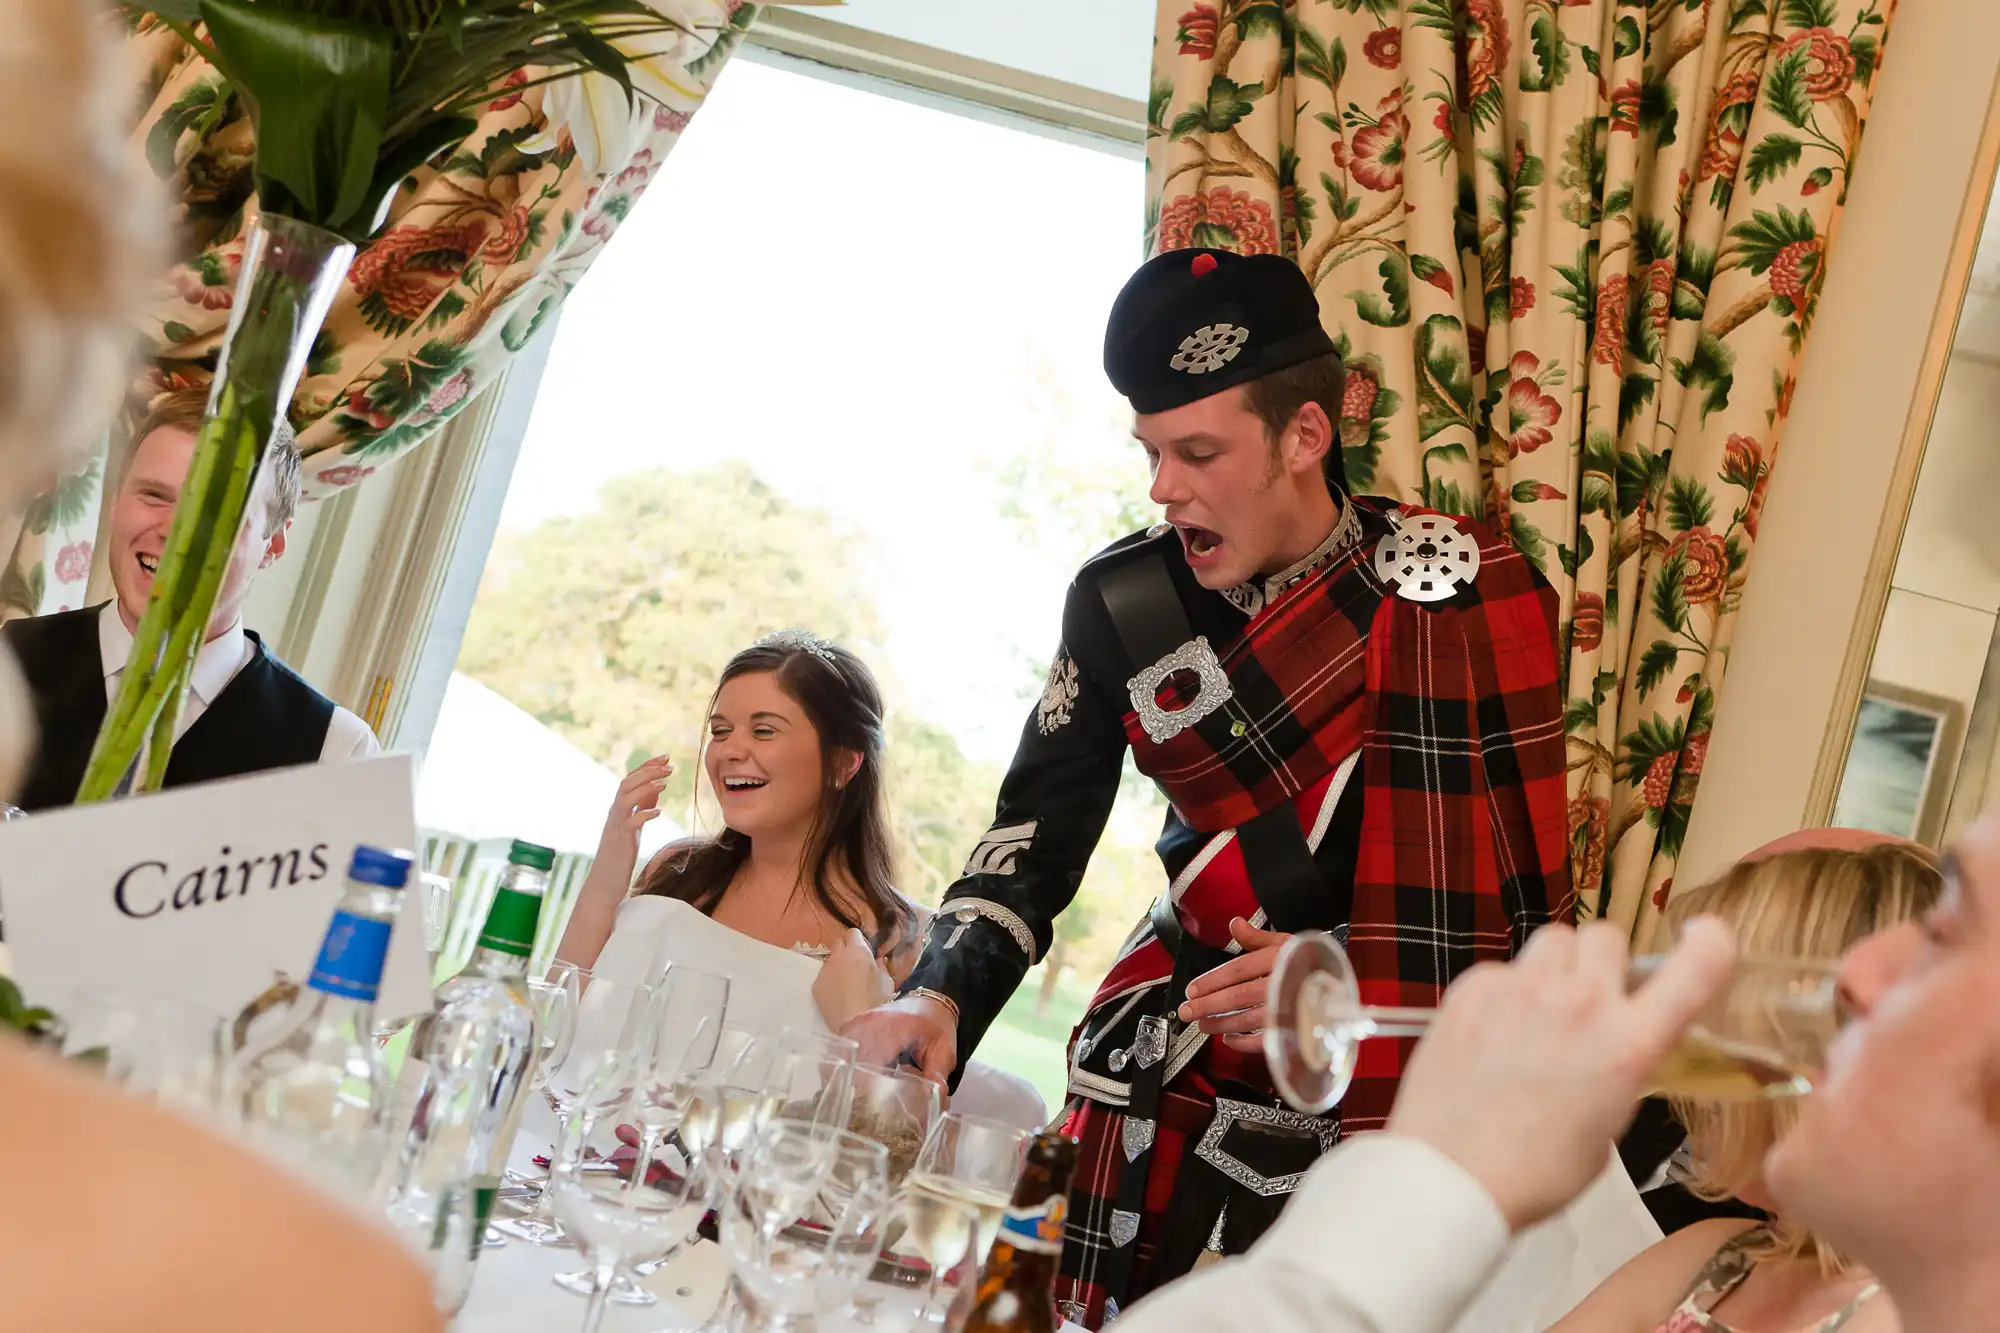 A man in scottish highland dress, including a kilt, animatedly speaks at a wedding reception, entertaining guests who are laughing and drinking.